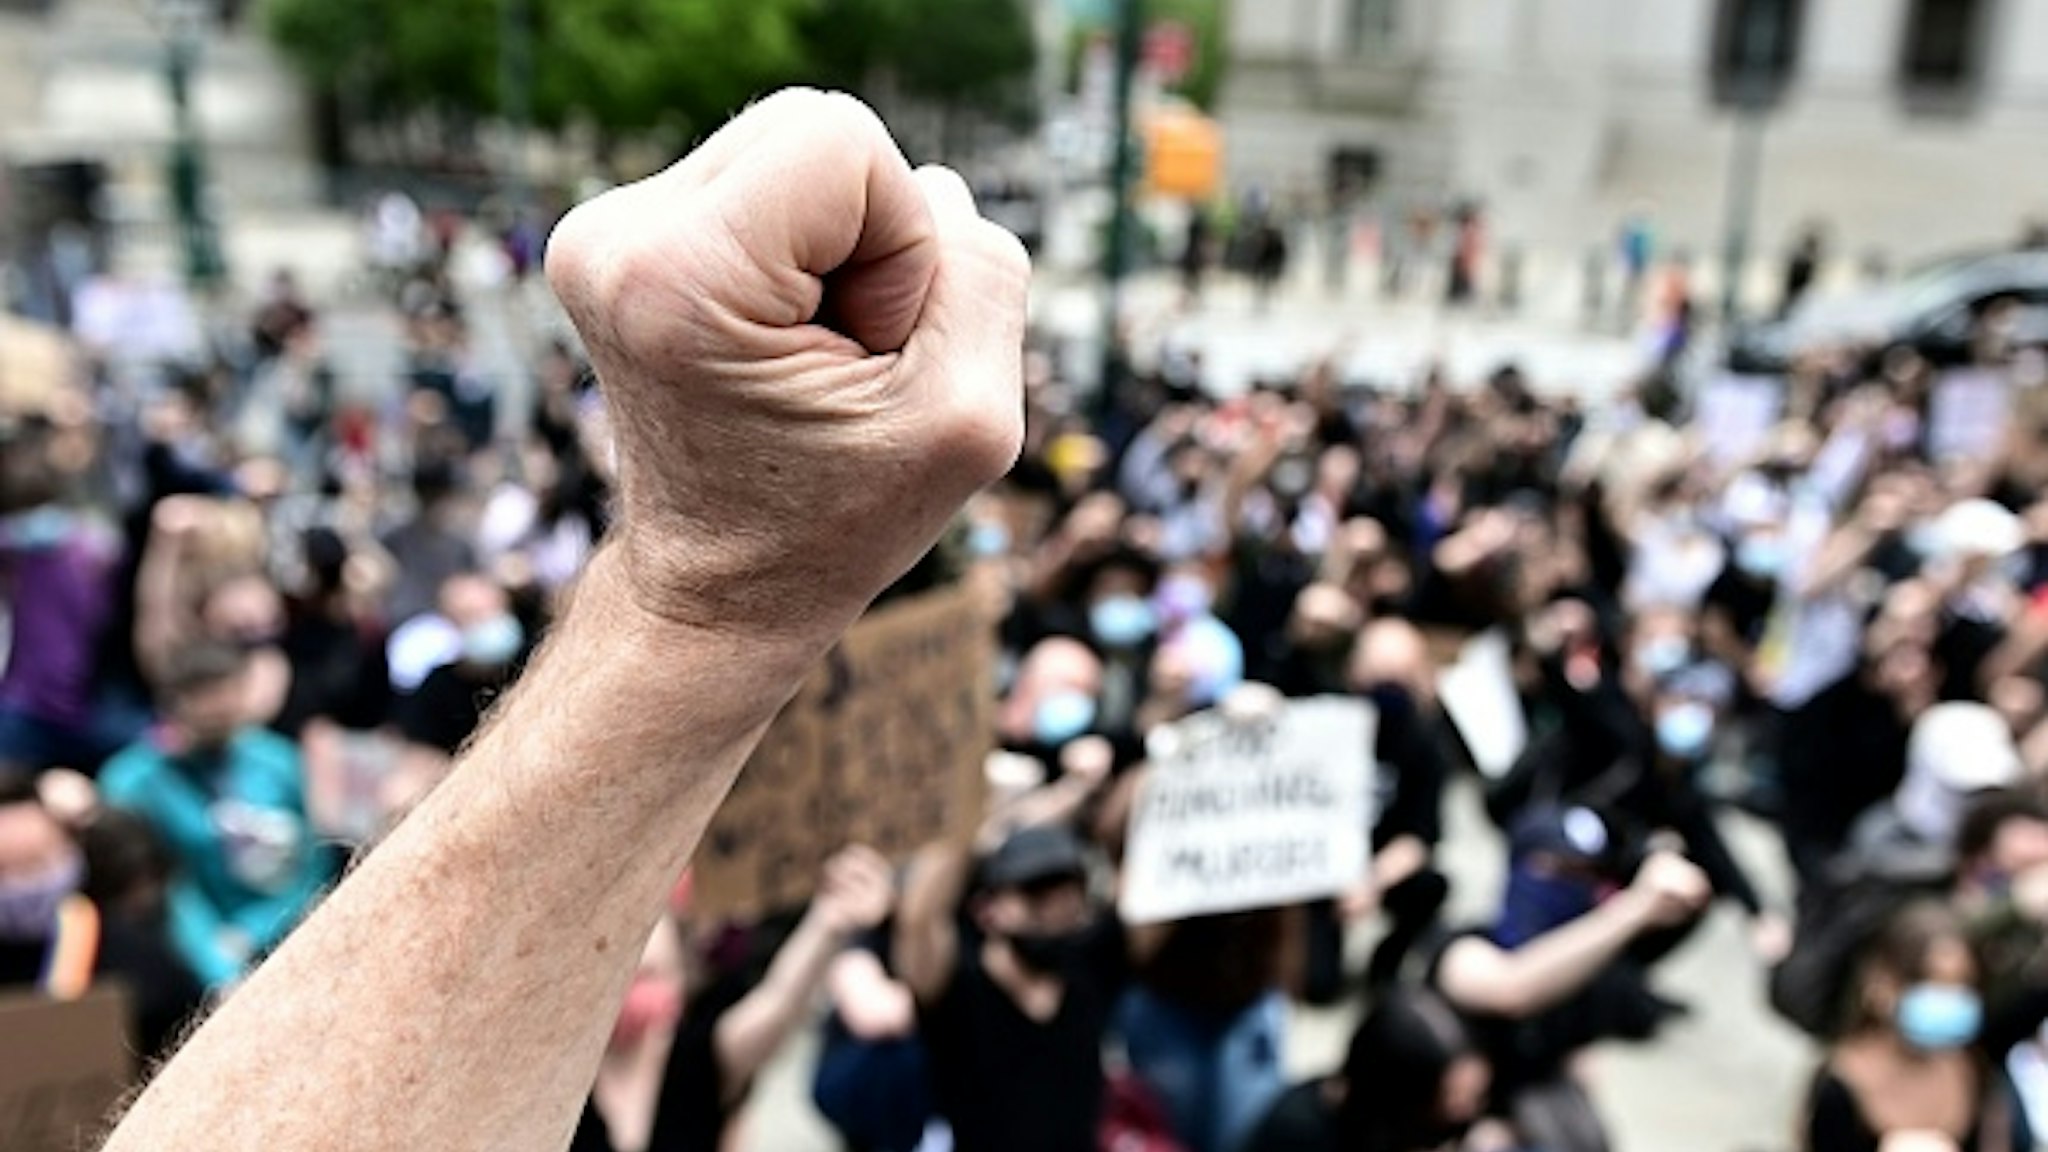 Protesters demonstrate on June 2, 2020, during a "Black Lives Matter" protest in New York City. - Anti-racism protests have put several US cities under curfew to suppress rioting, following the death of George Floyd while in police custody.